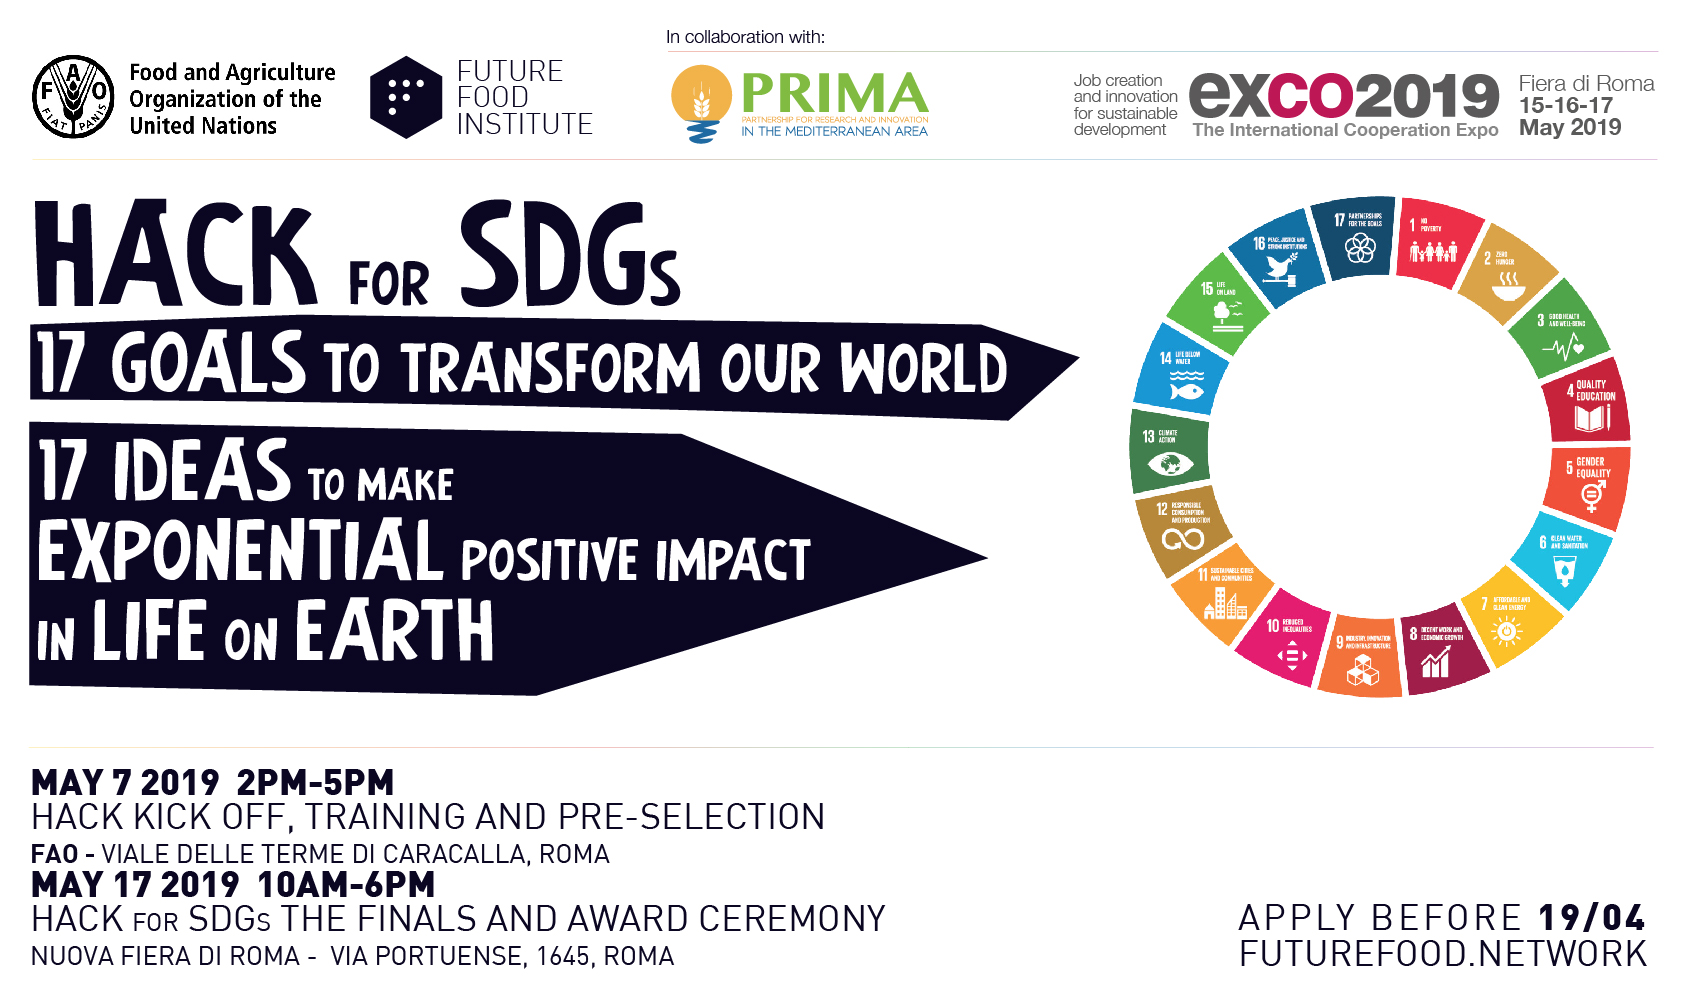 Hack for SDGs – The first ever FAO&FFI Hackathon for Sustainable Development Goals